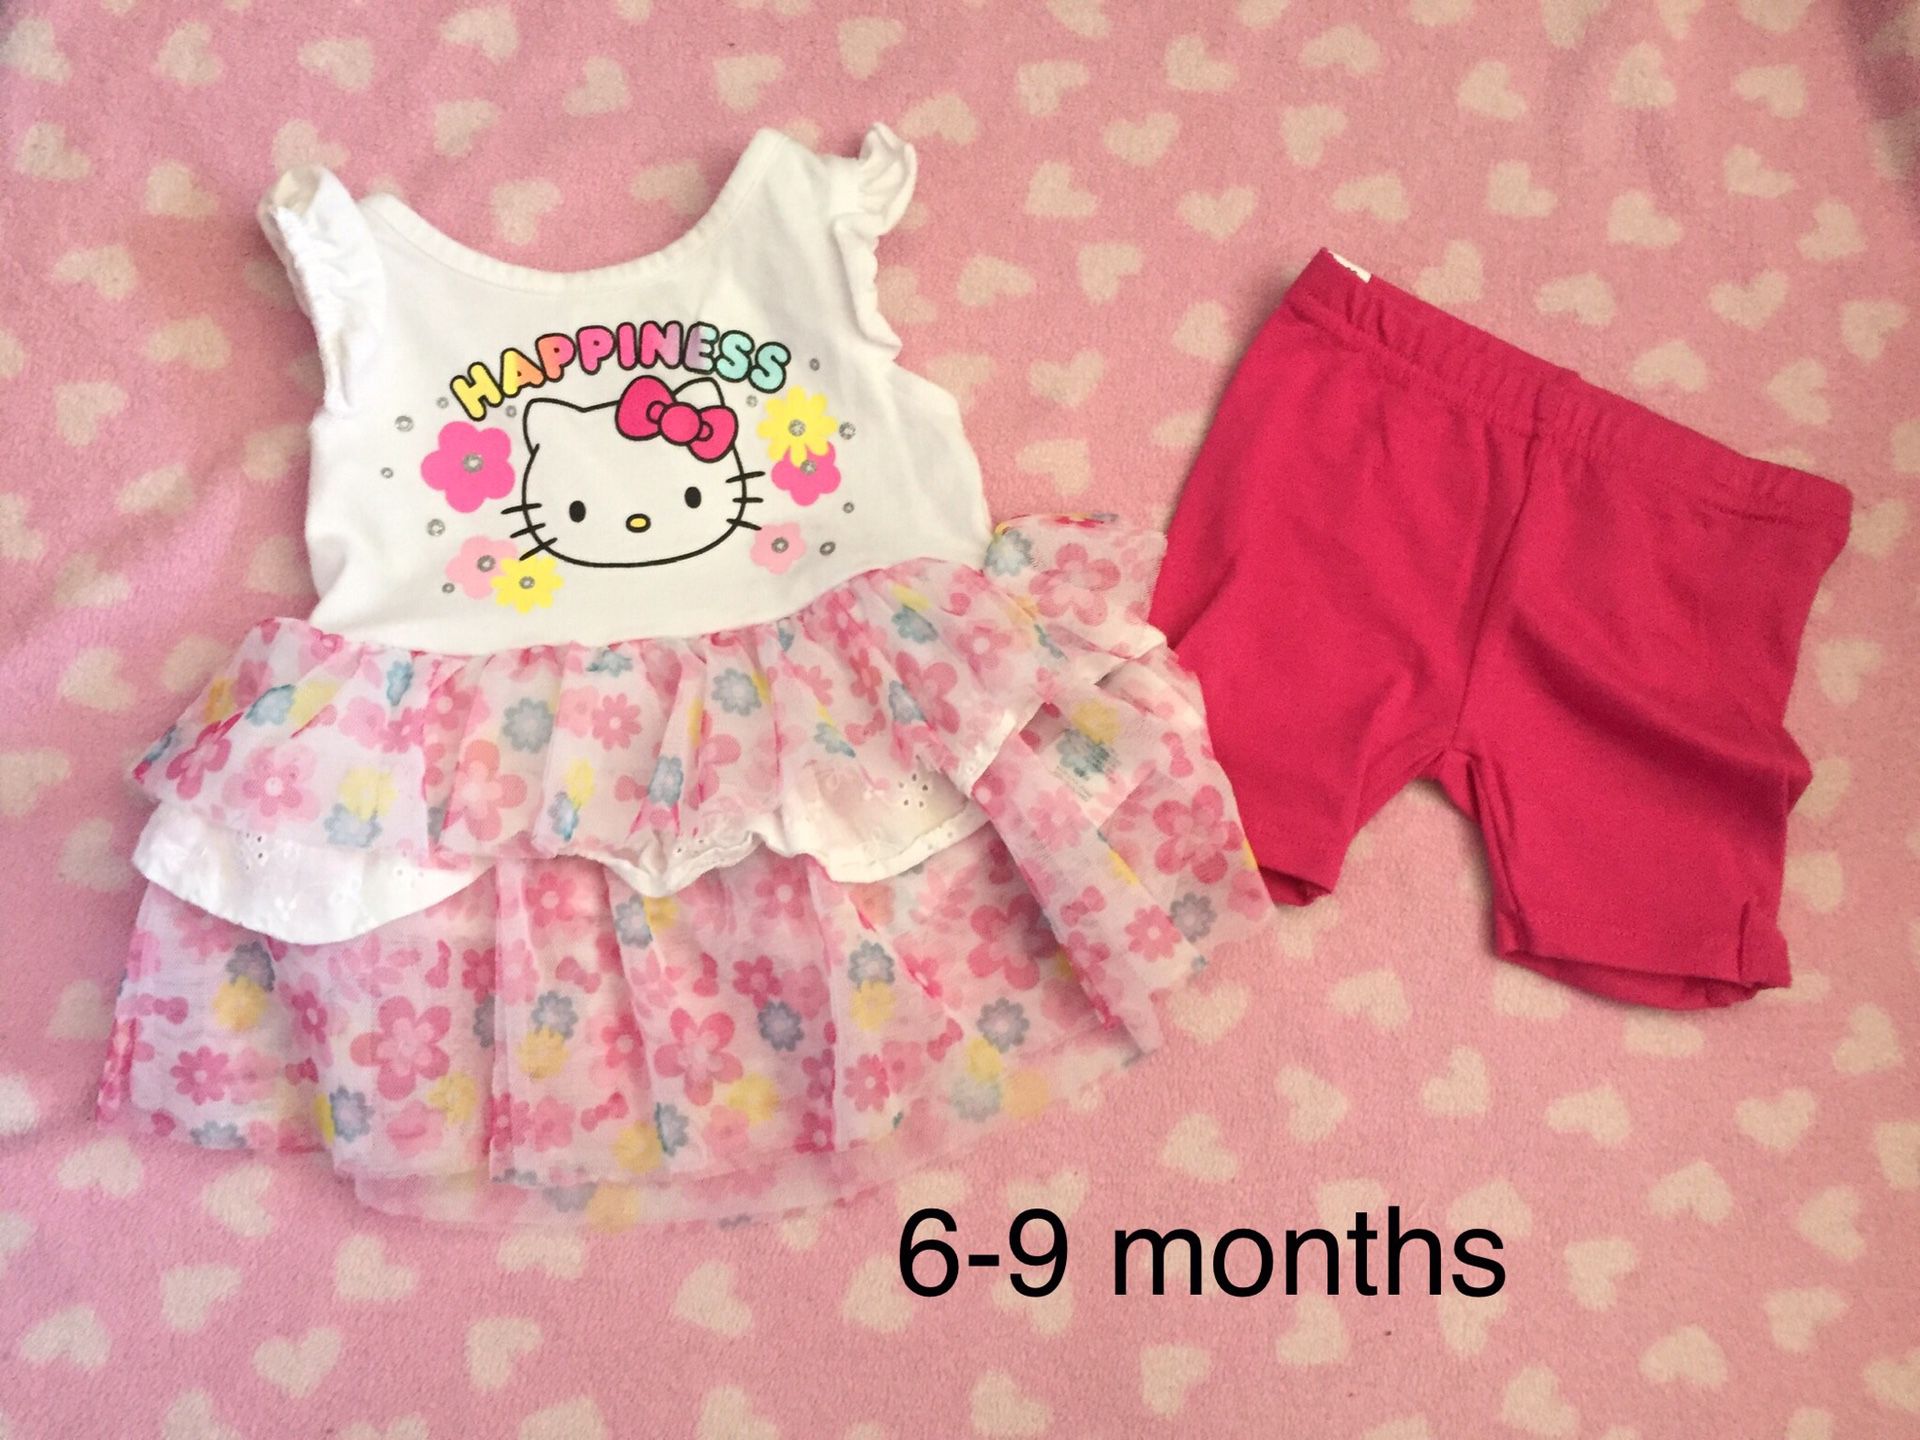 Baby girl hello kitty outfit shirt pants size 6-9 months